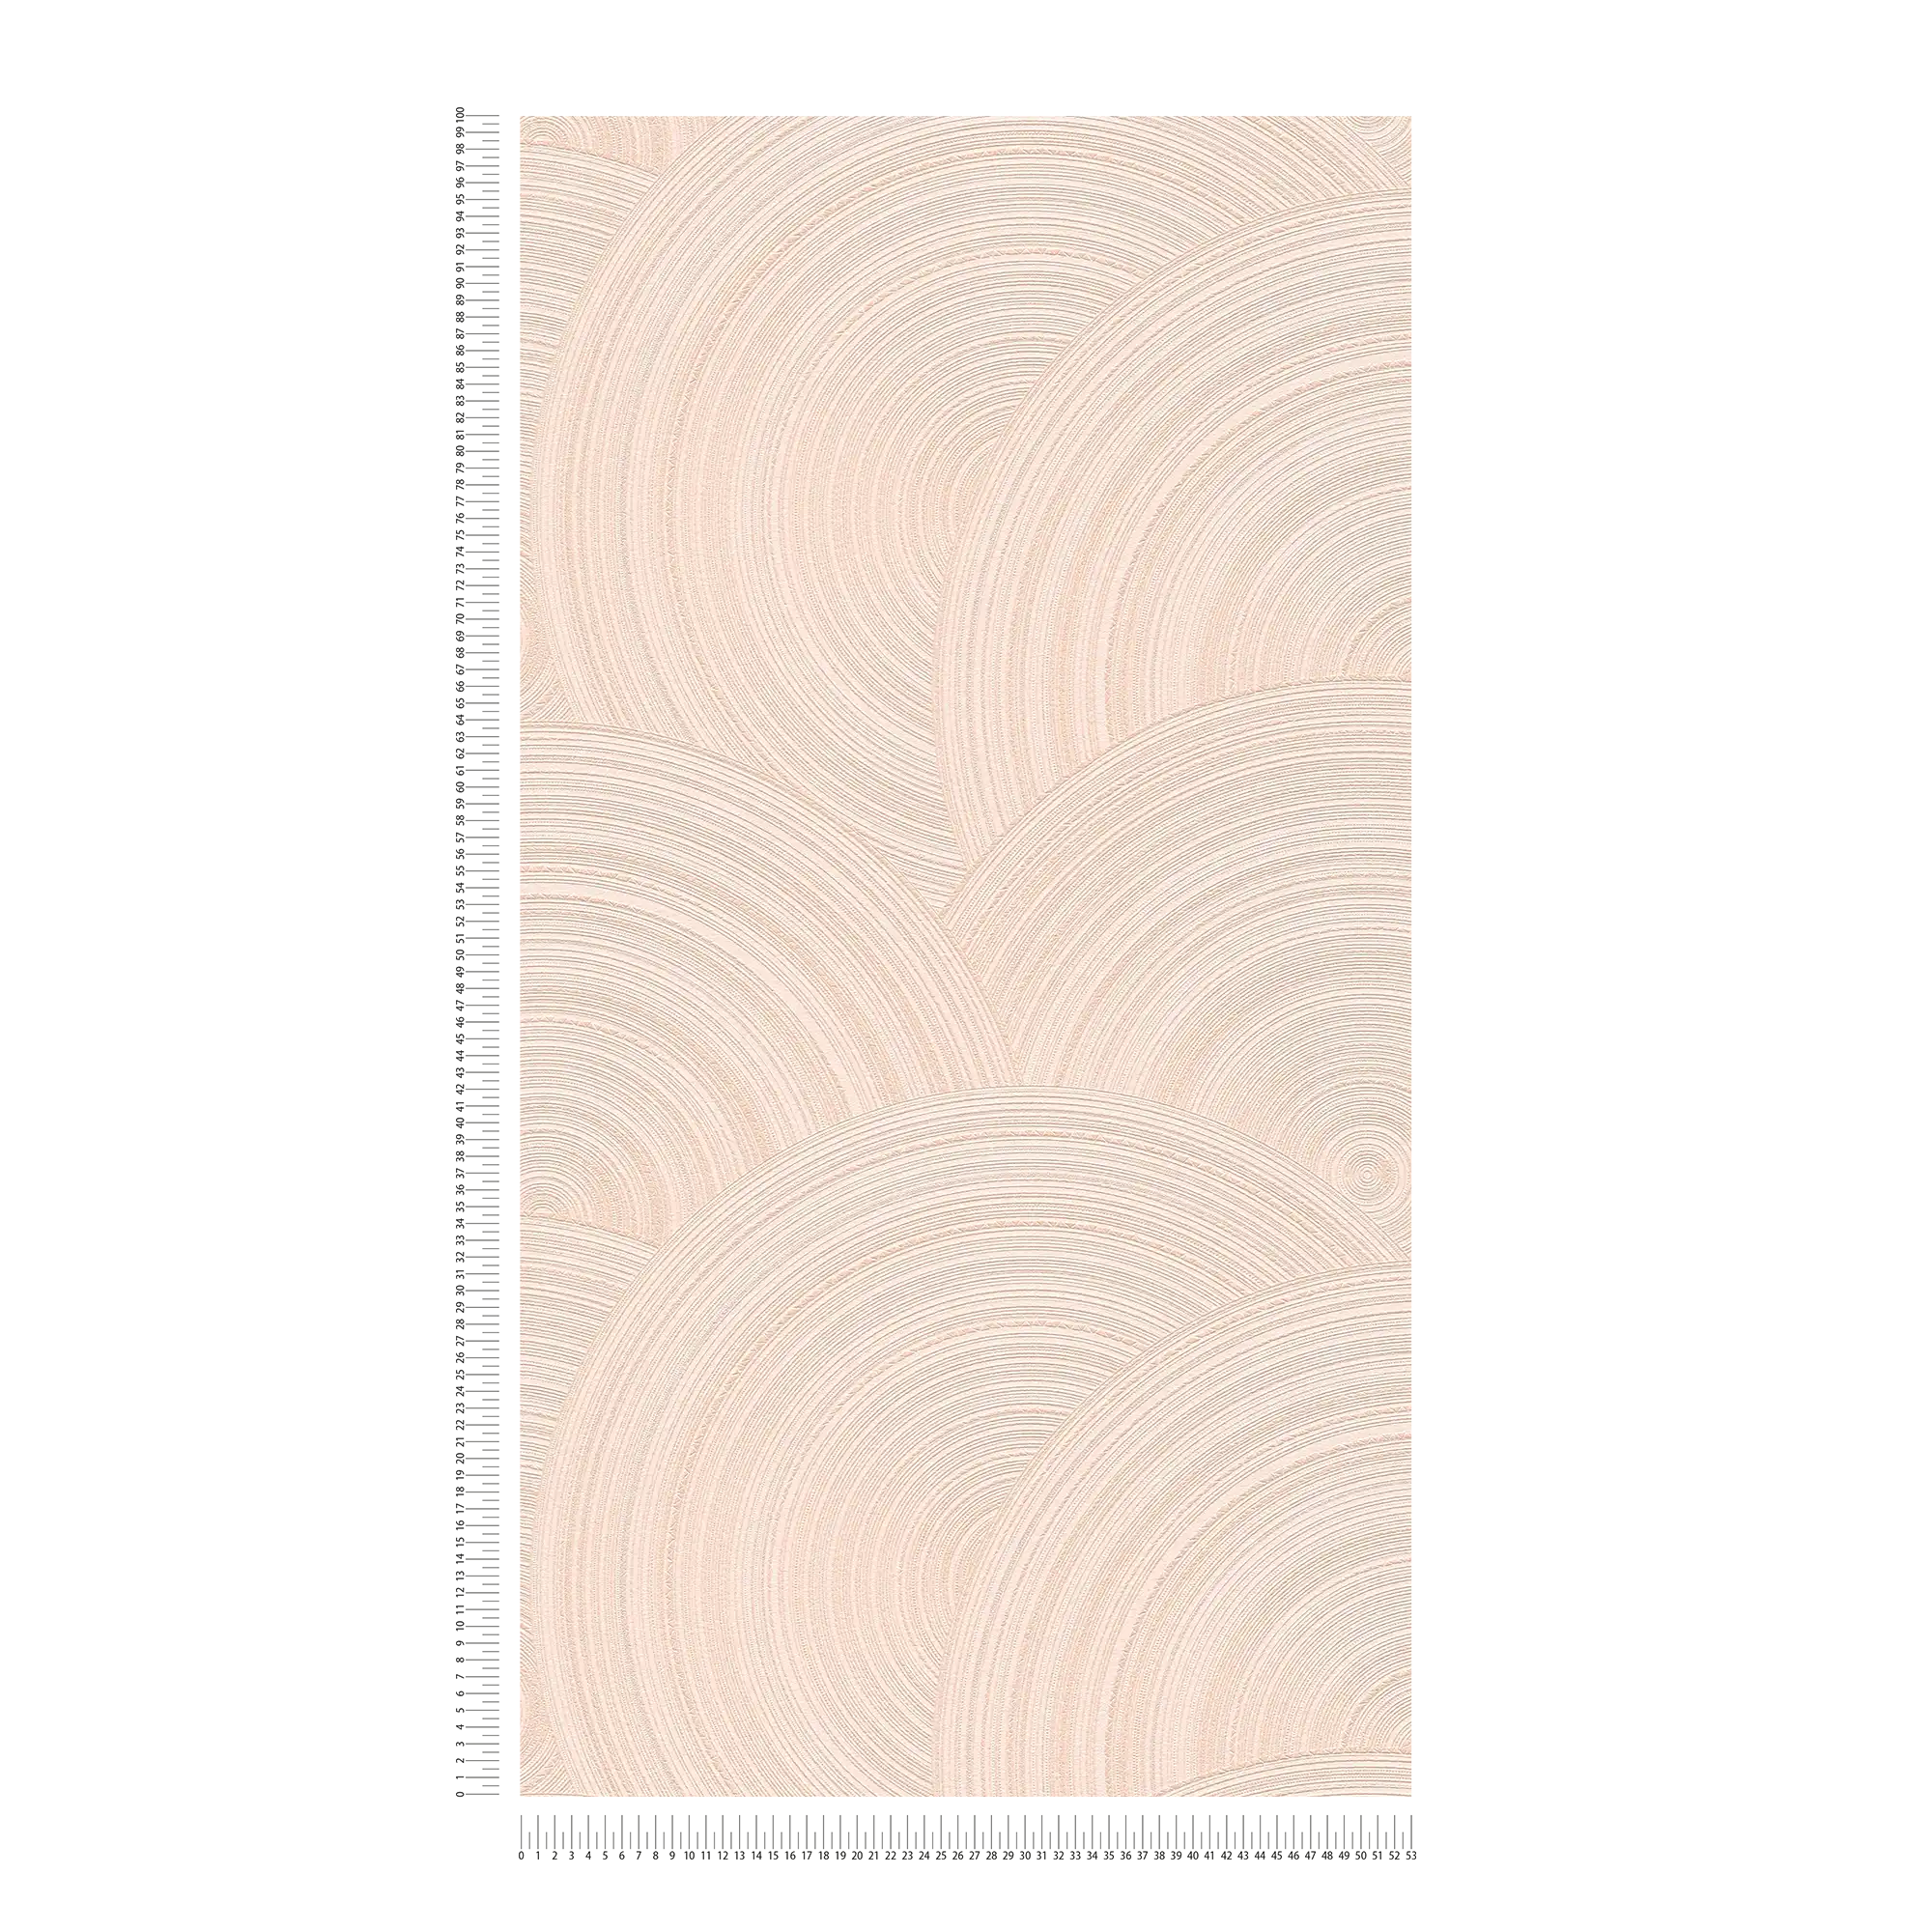             Non-woven wallpaper circle pattern with textured surface - pink
        